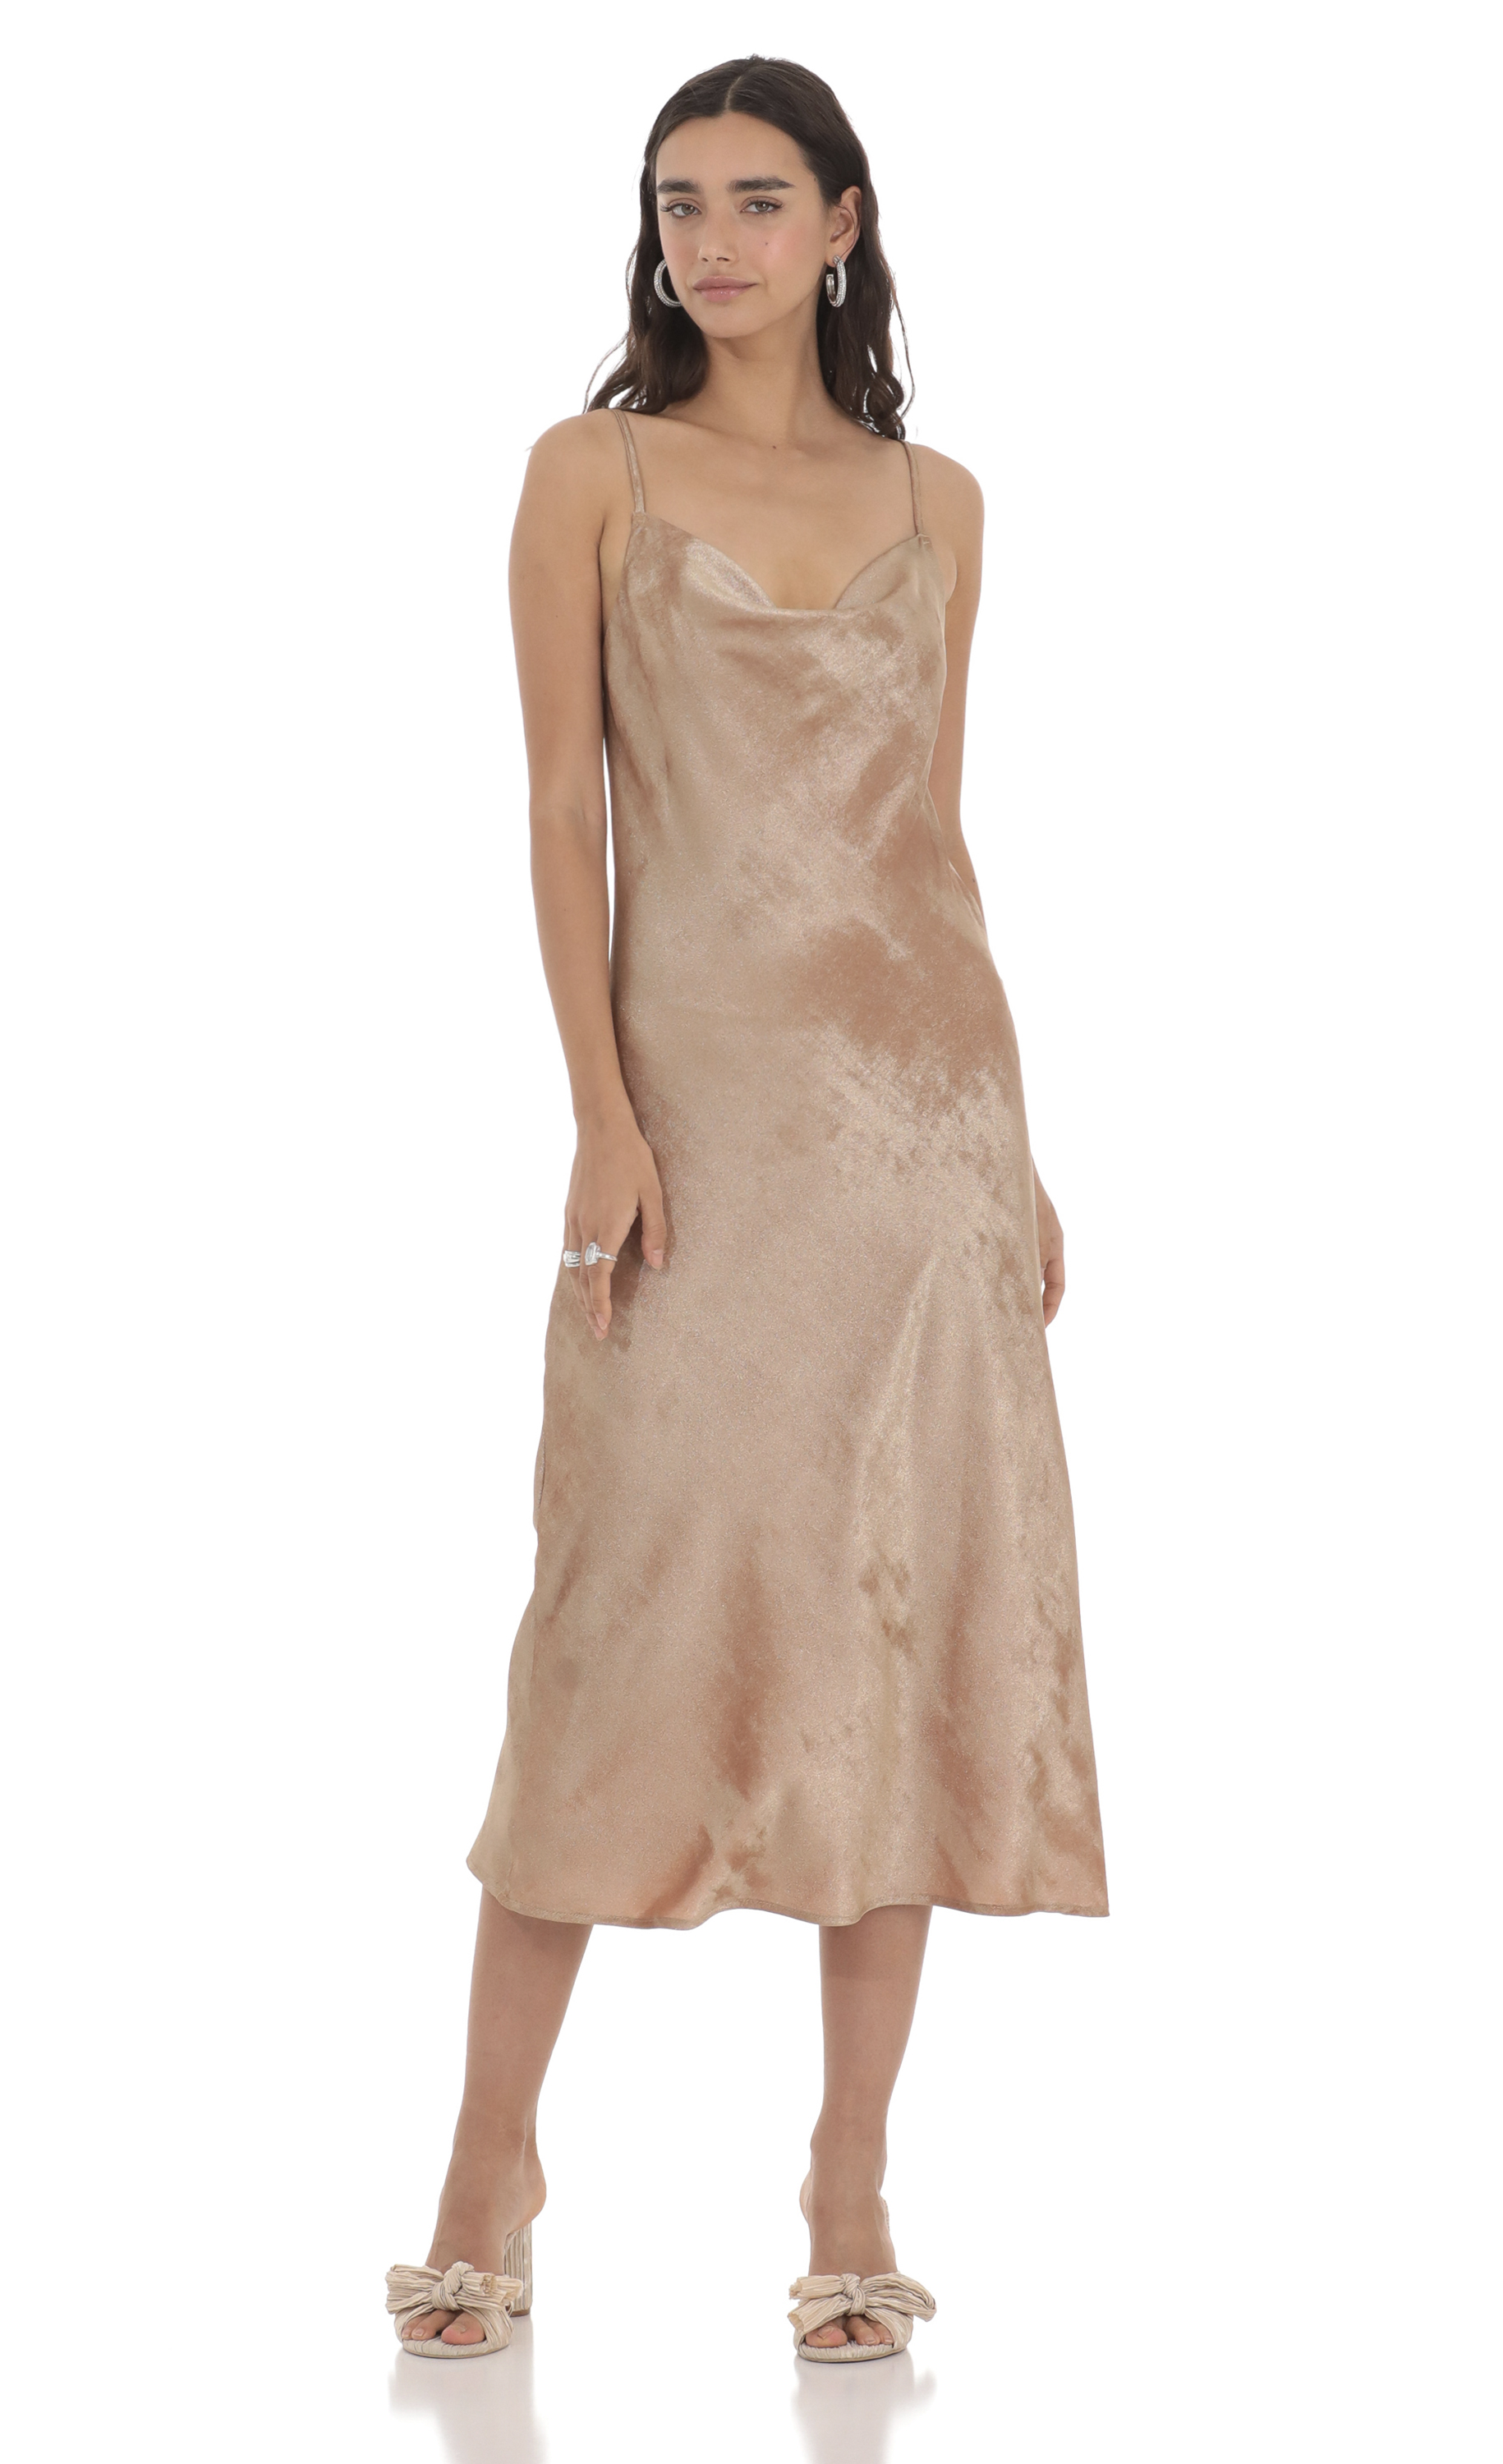 Crushed Shimmer Midi Dress in Sand